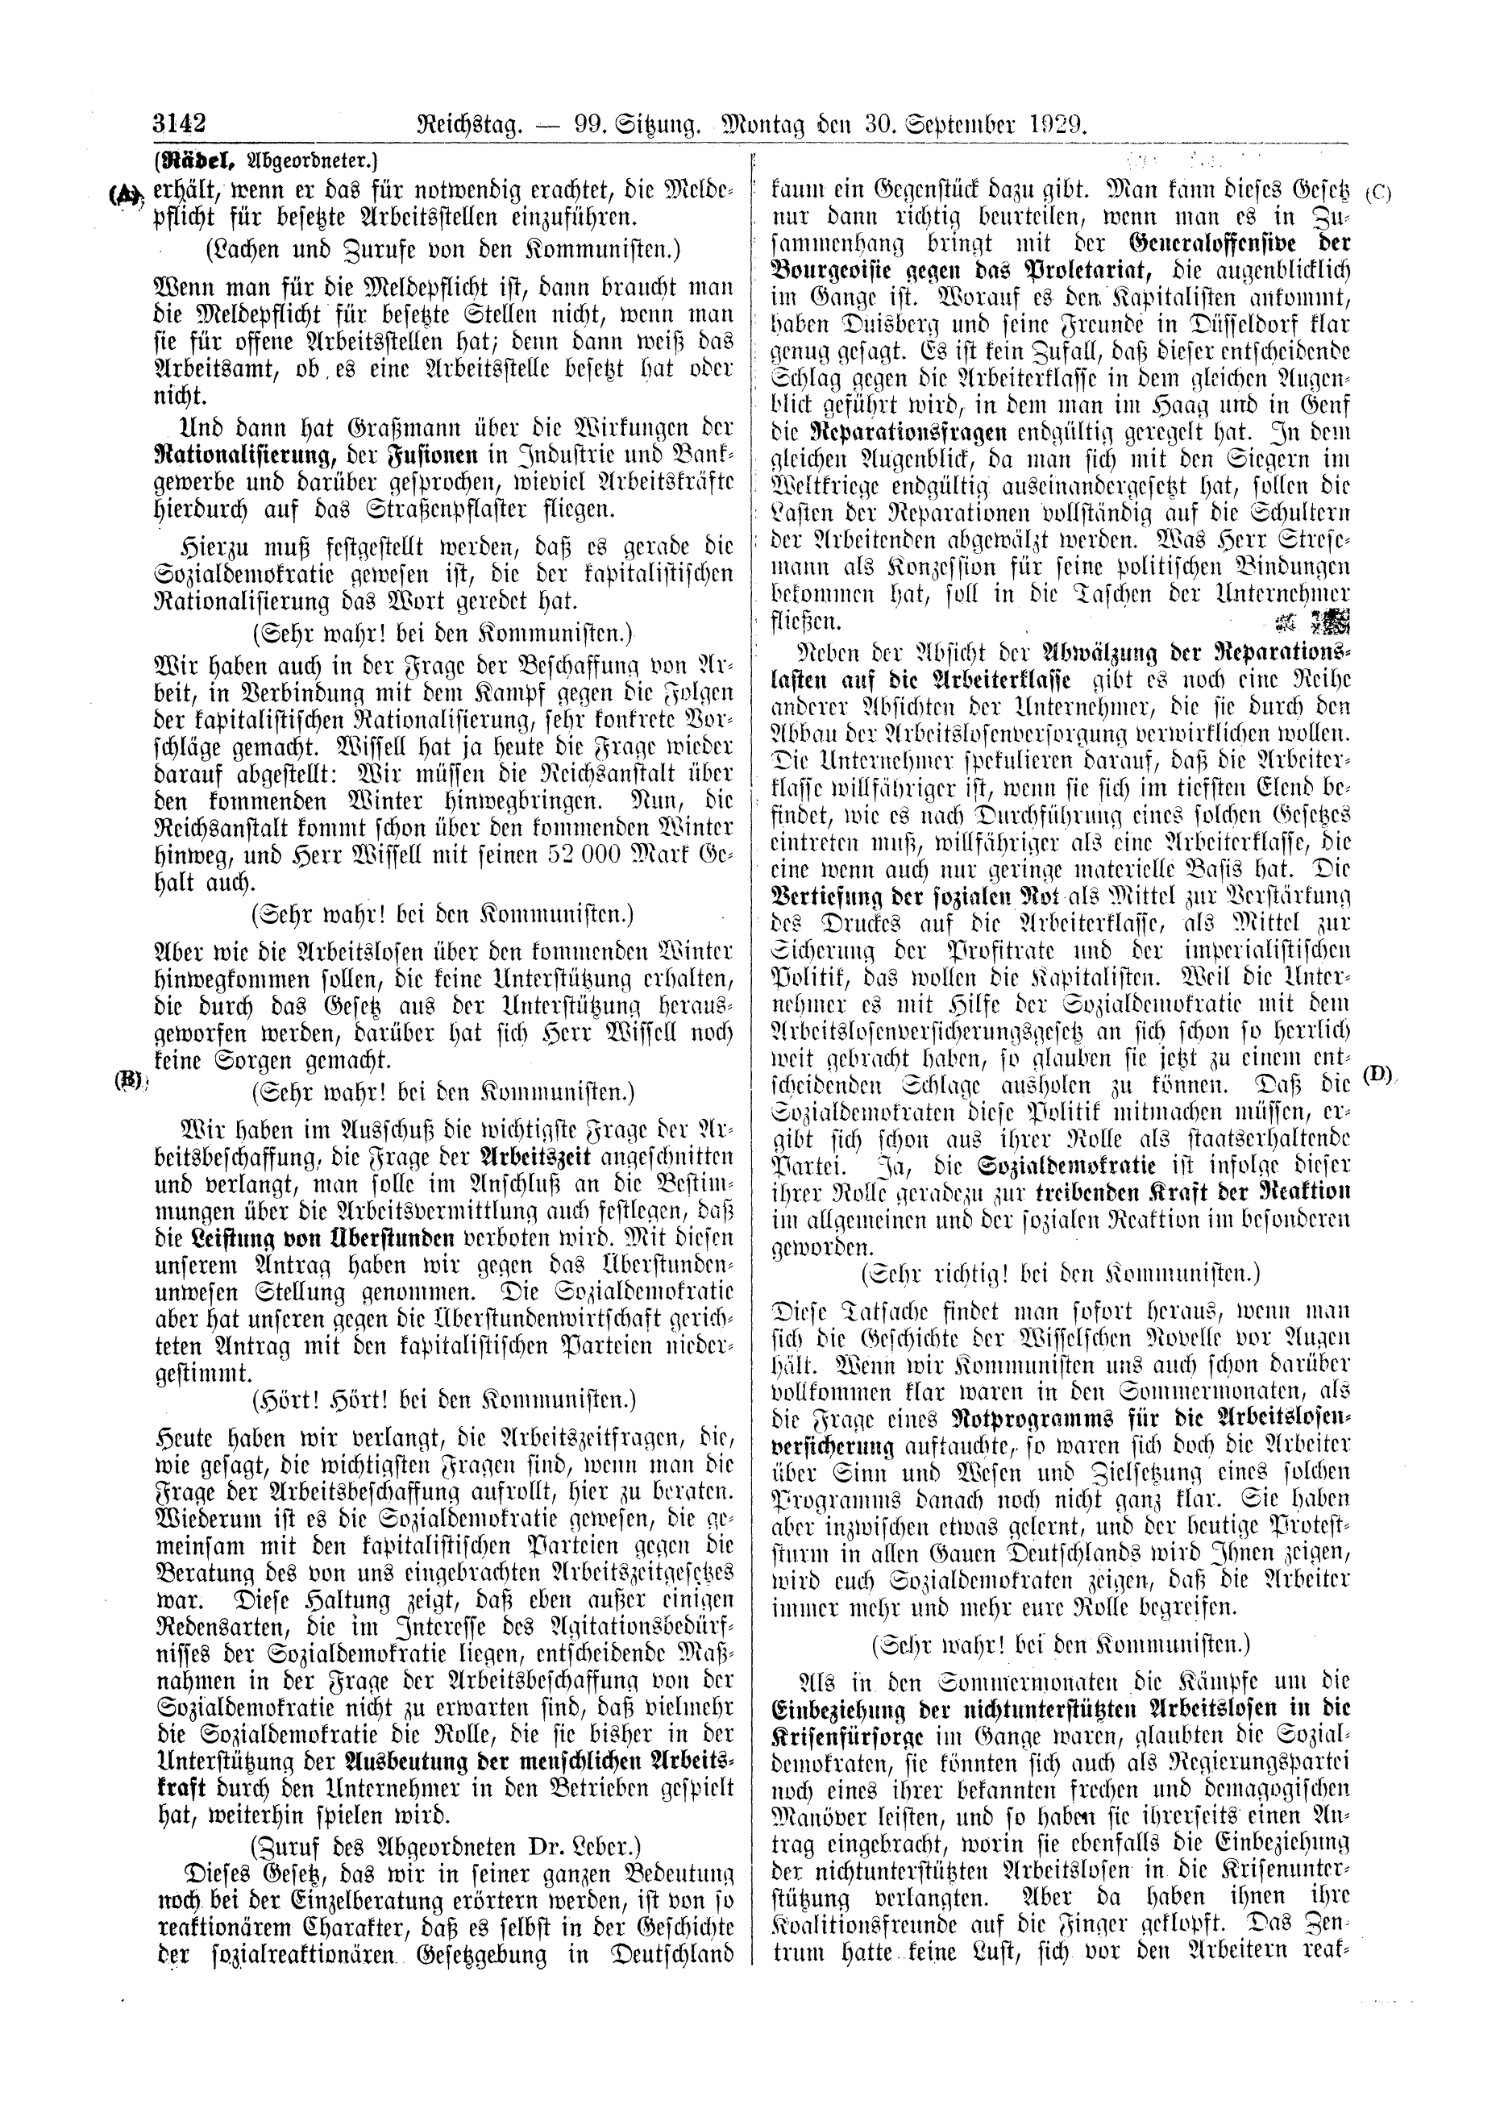 Scan of page 3142